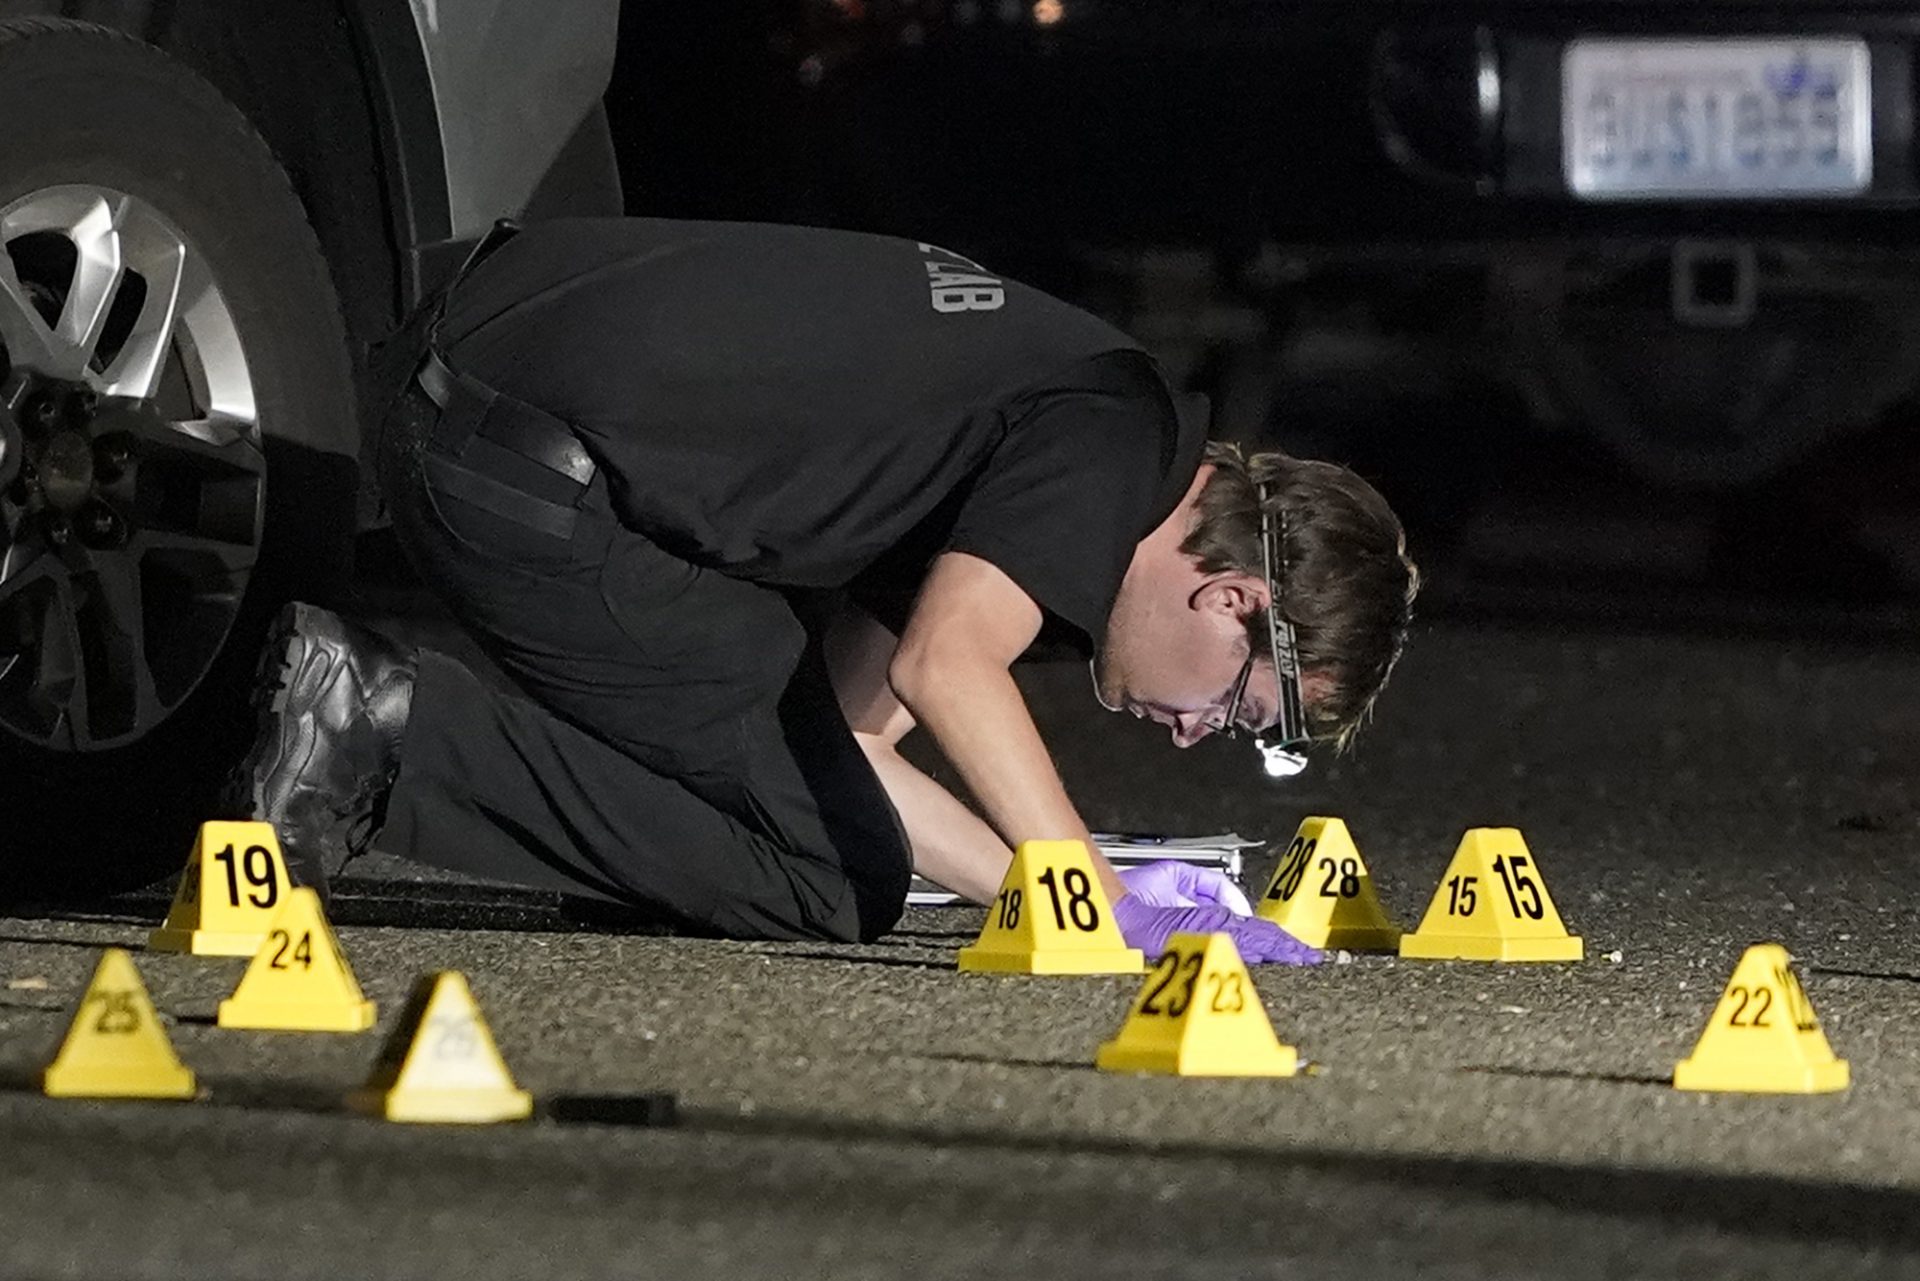 A Washington State Patrol Crime Lab worker looks at evidence markers in the early morning hours of Friday, Sept. 4, 2020, in Lacey, Wash. at the scene where Michael Reinoehl was killed Thursday night as investigators moved in to arrest him. Reinoehl had been suspected of fatally shooting a supporter of a right-wing group in Portland, Oregon, last week after a caravan of Donald Trump backers rode through downtown Portland.